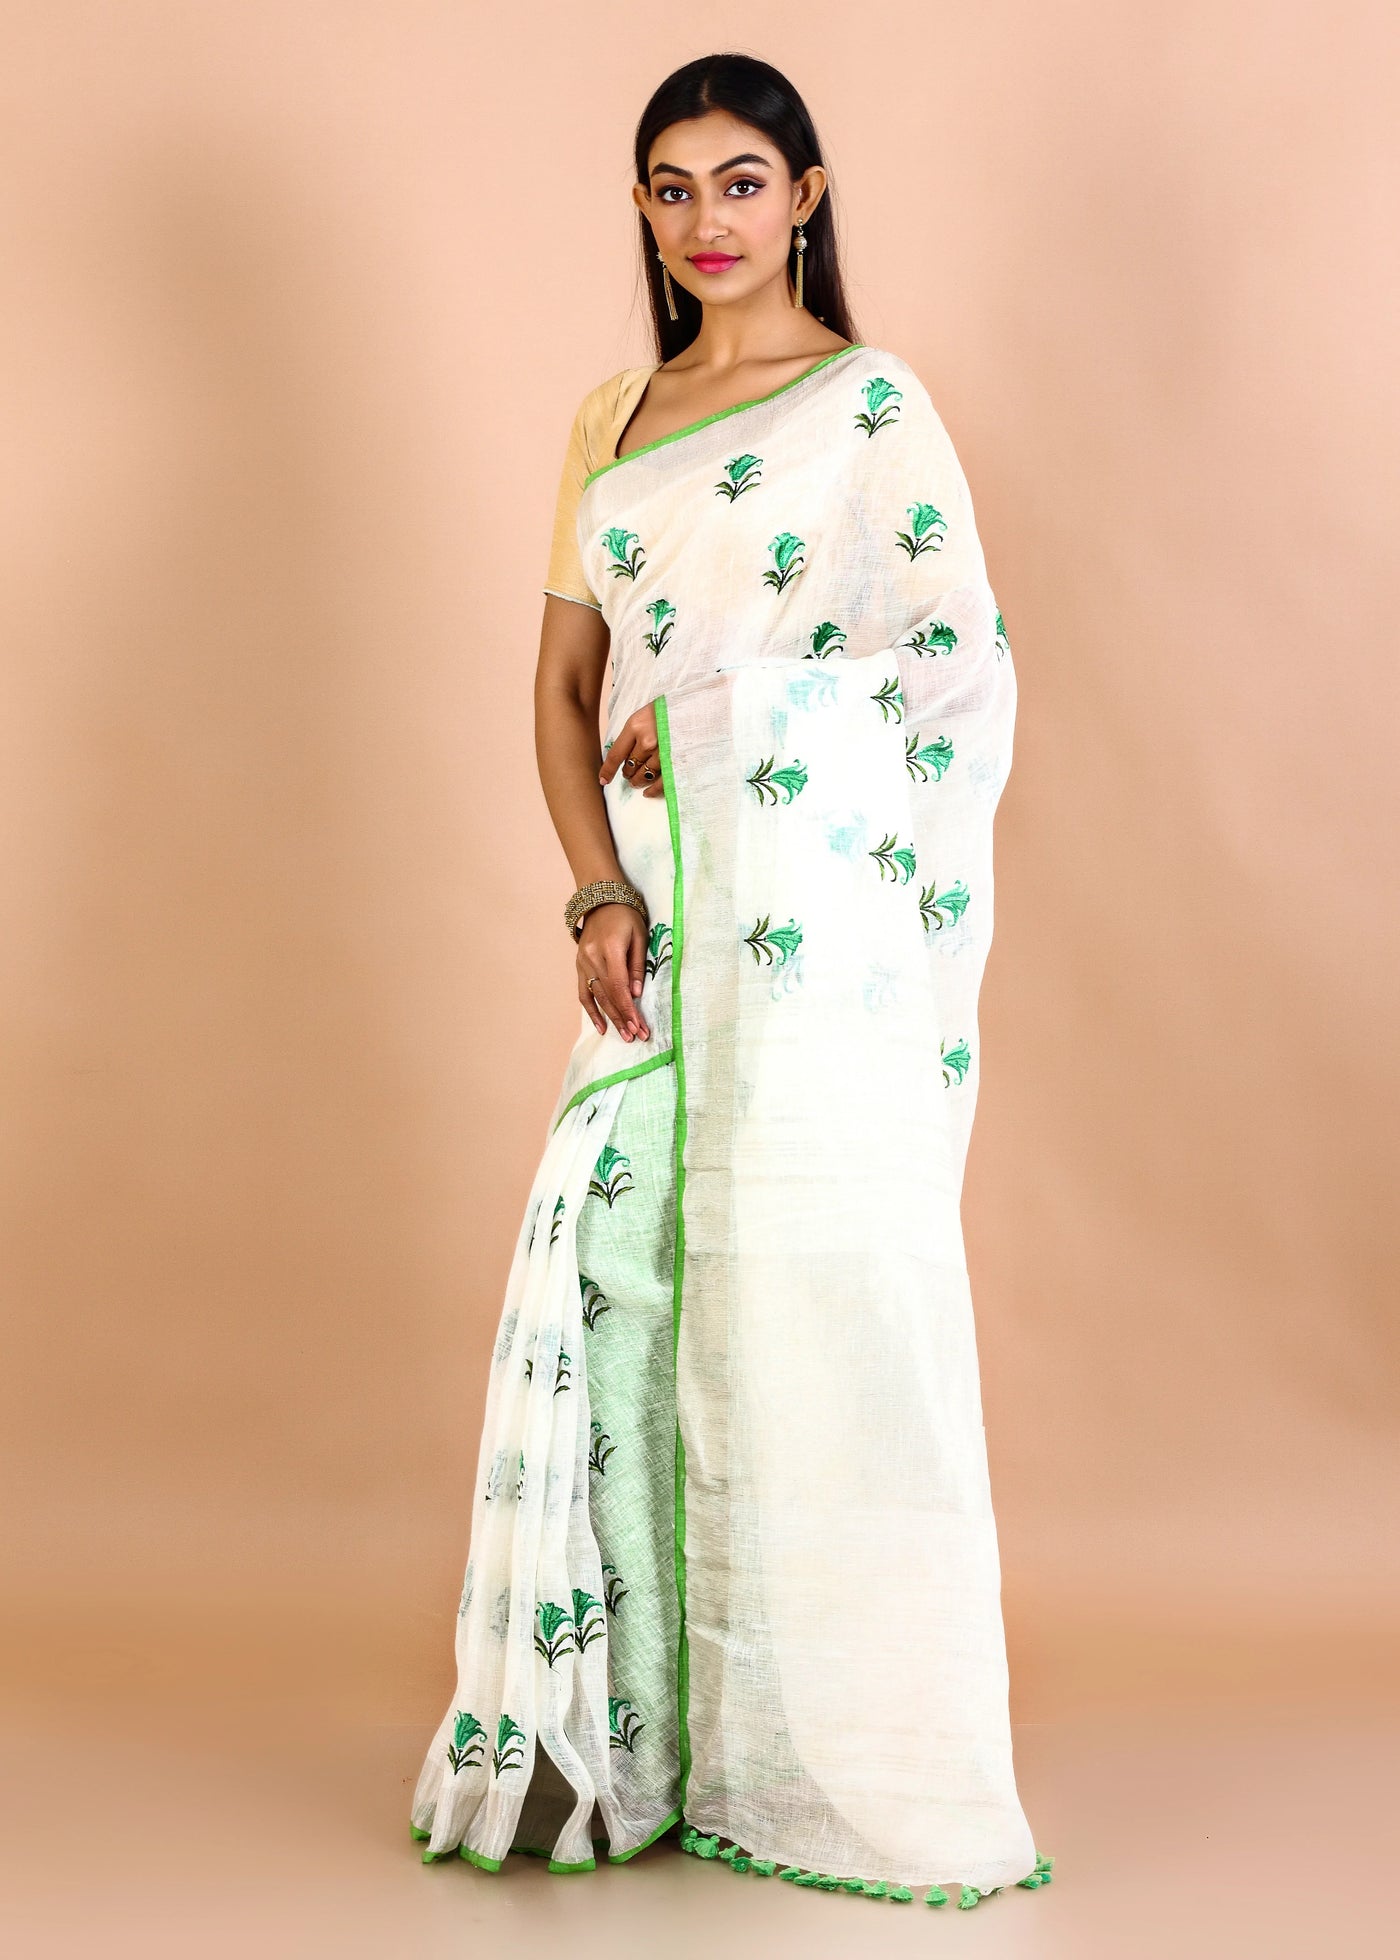 Off White Pure Linen Floral Embroidery Saree With Jadi Border pompom